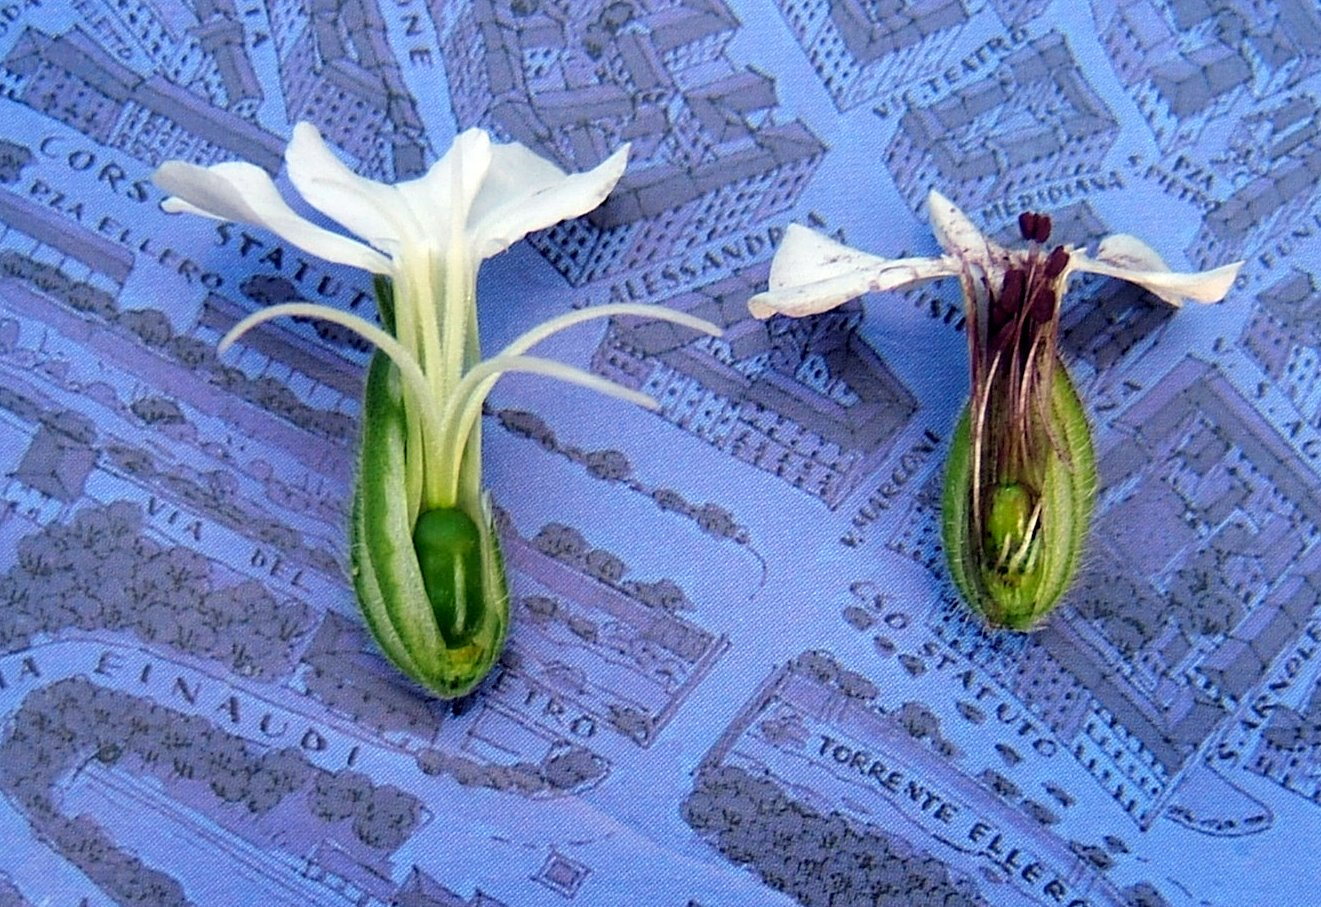 A healthy flower, left, and a smut-infected flower, right.